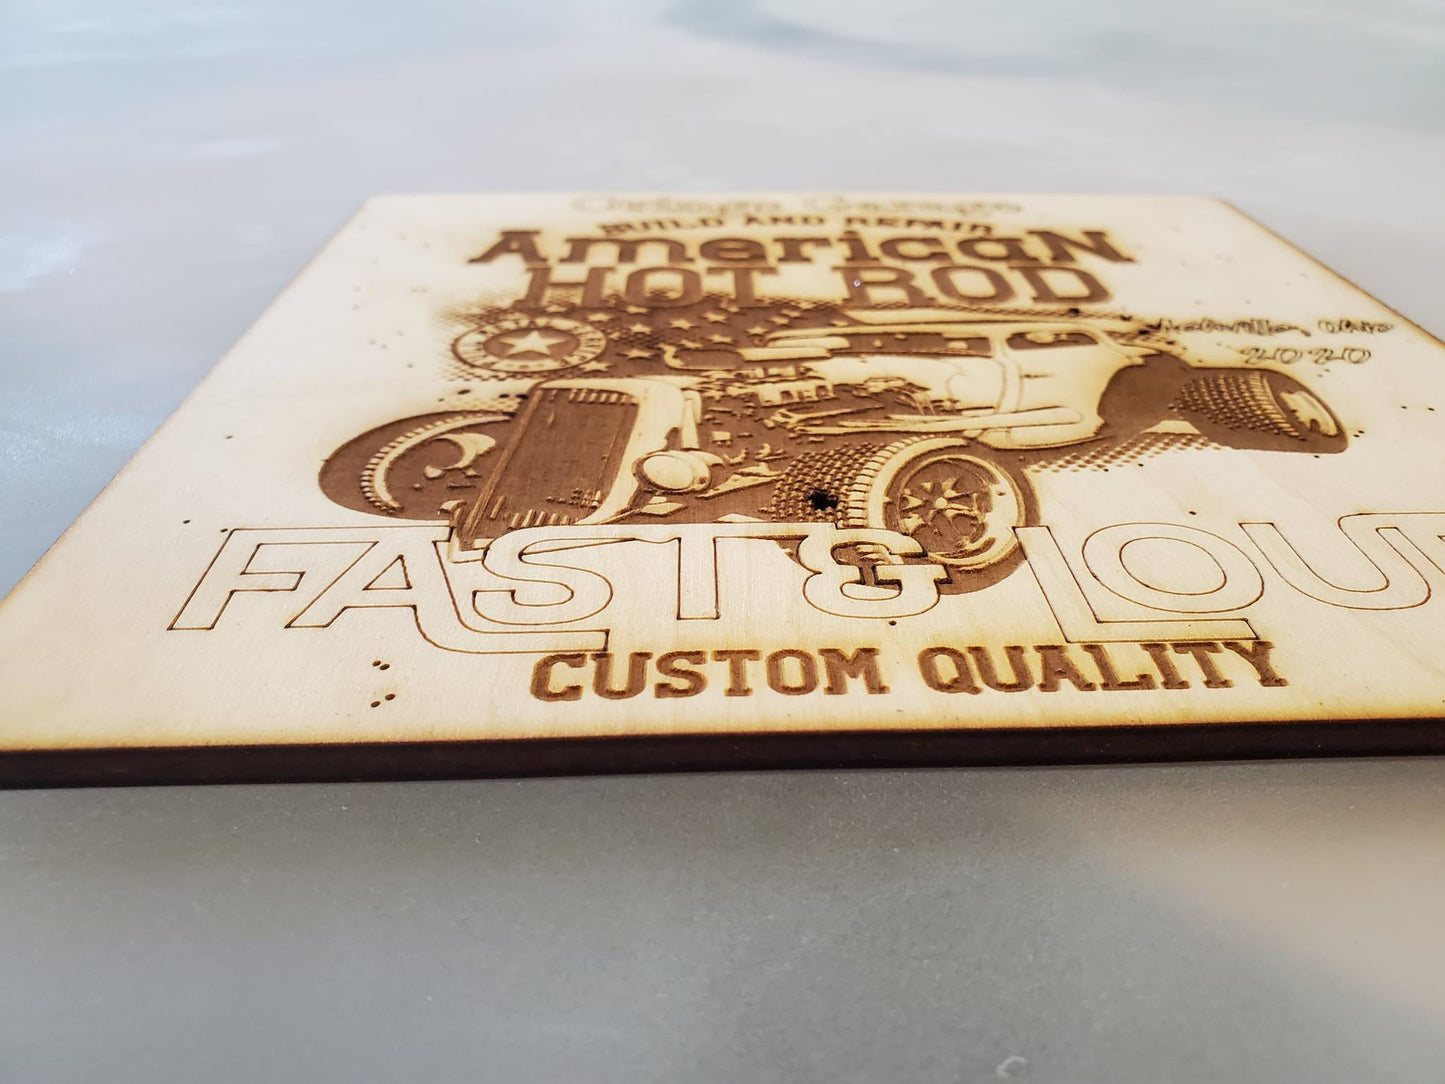 Classic Car Show, Award, Plaque, American Hot Rod, Garage, Custom, Personalize, Engraved, Wood, Dad Gift,